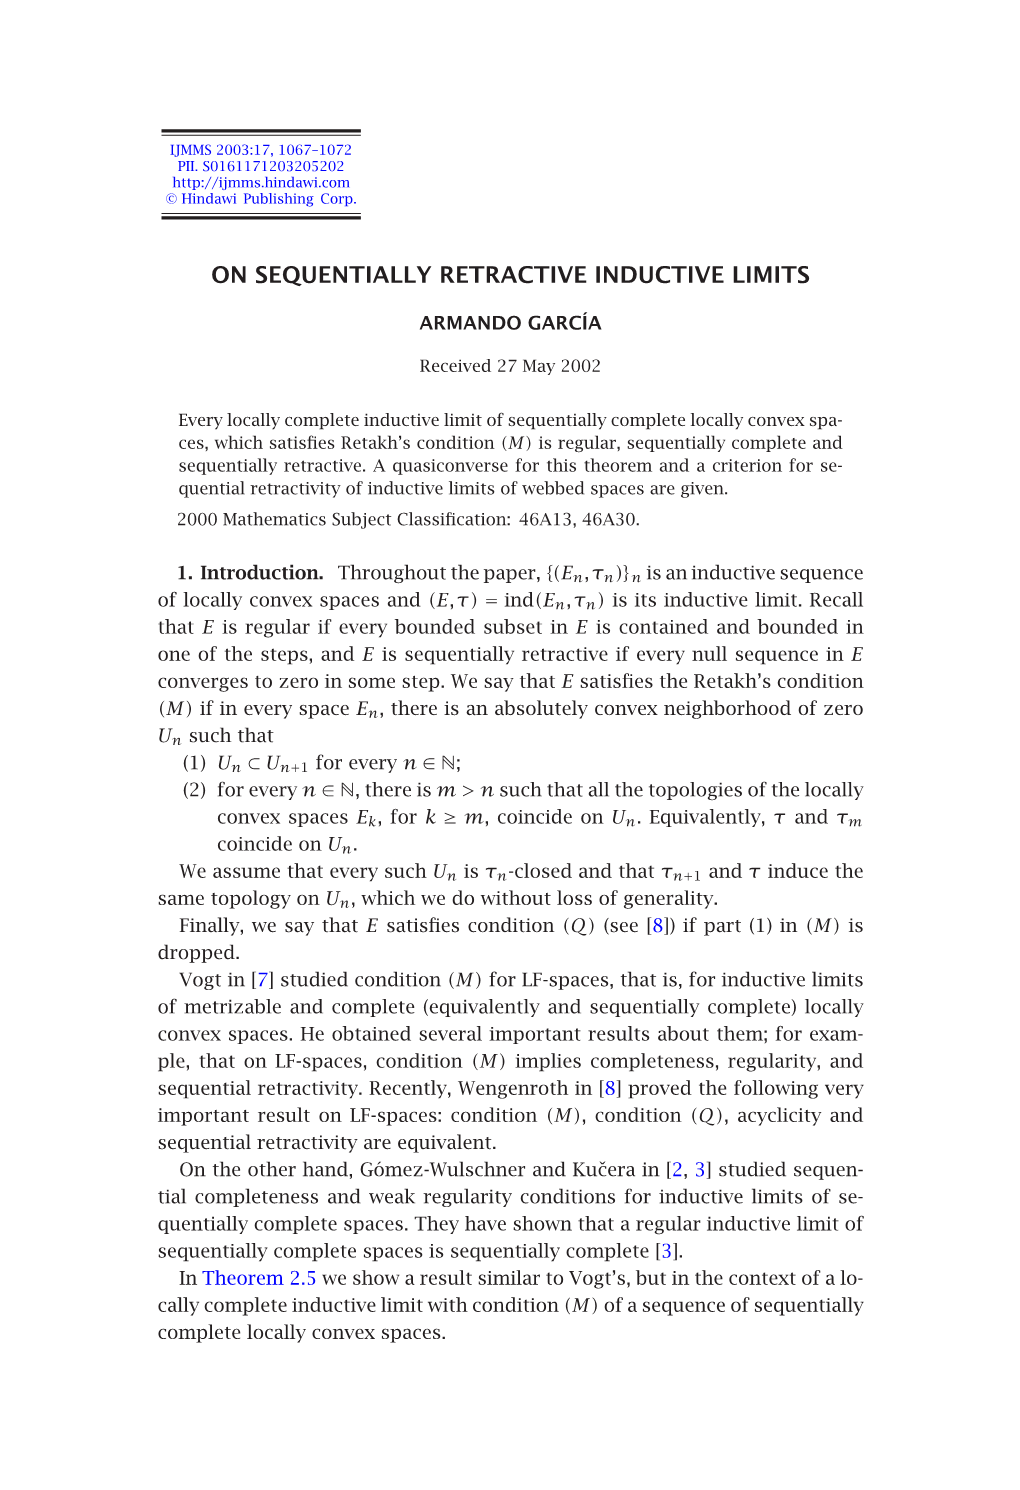 On Sequentially Retractive Inductive Limits